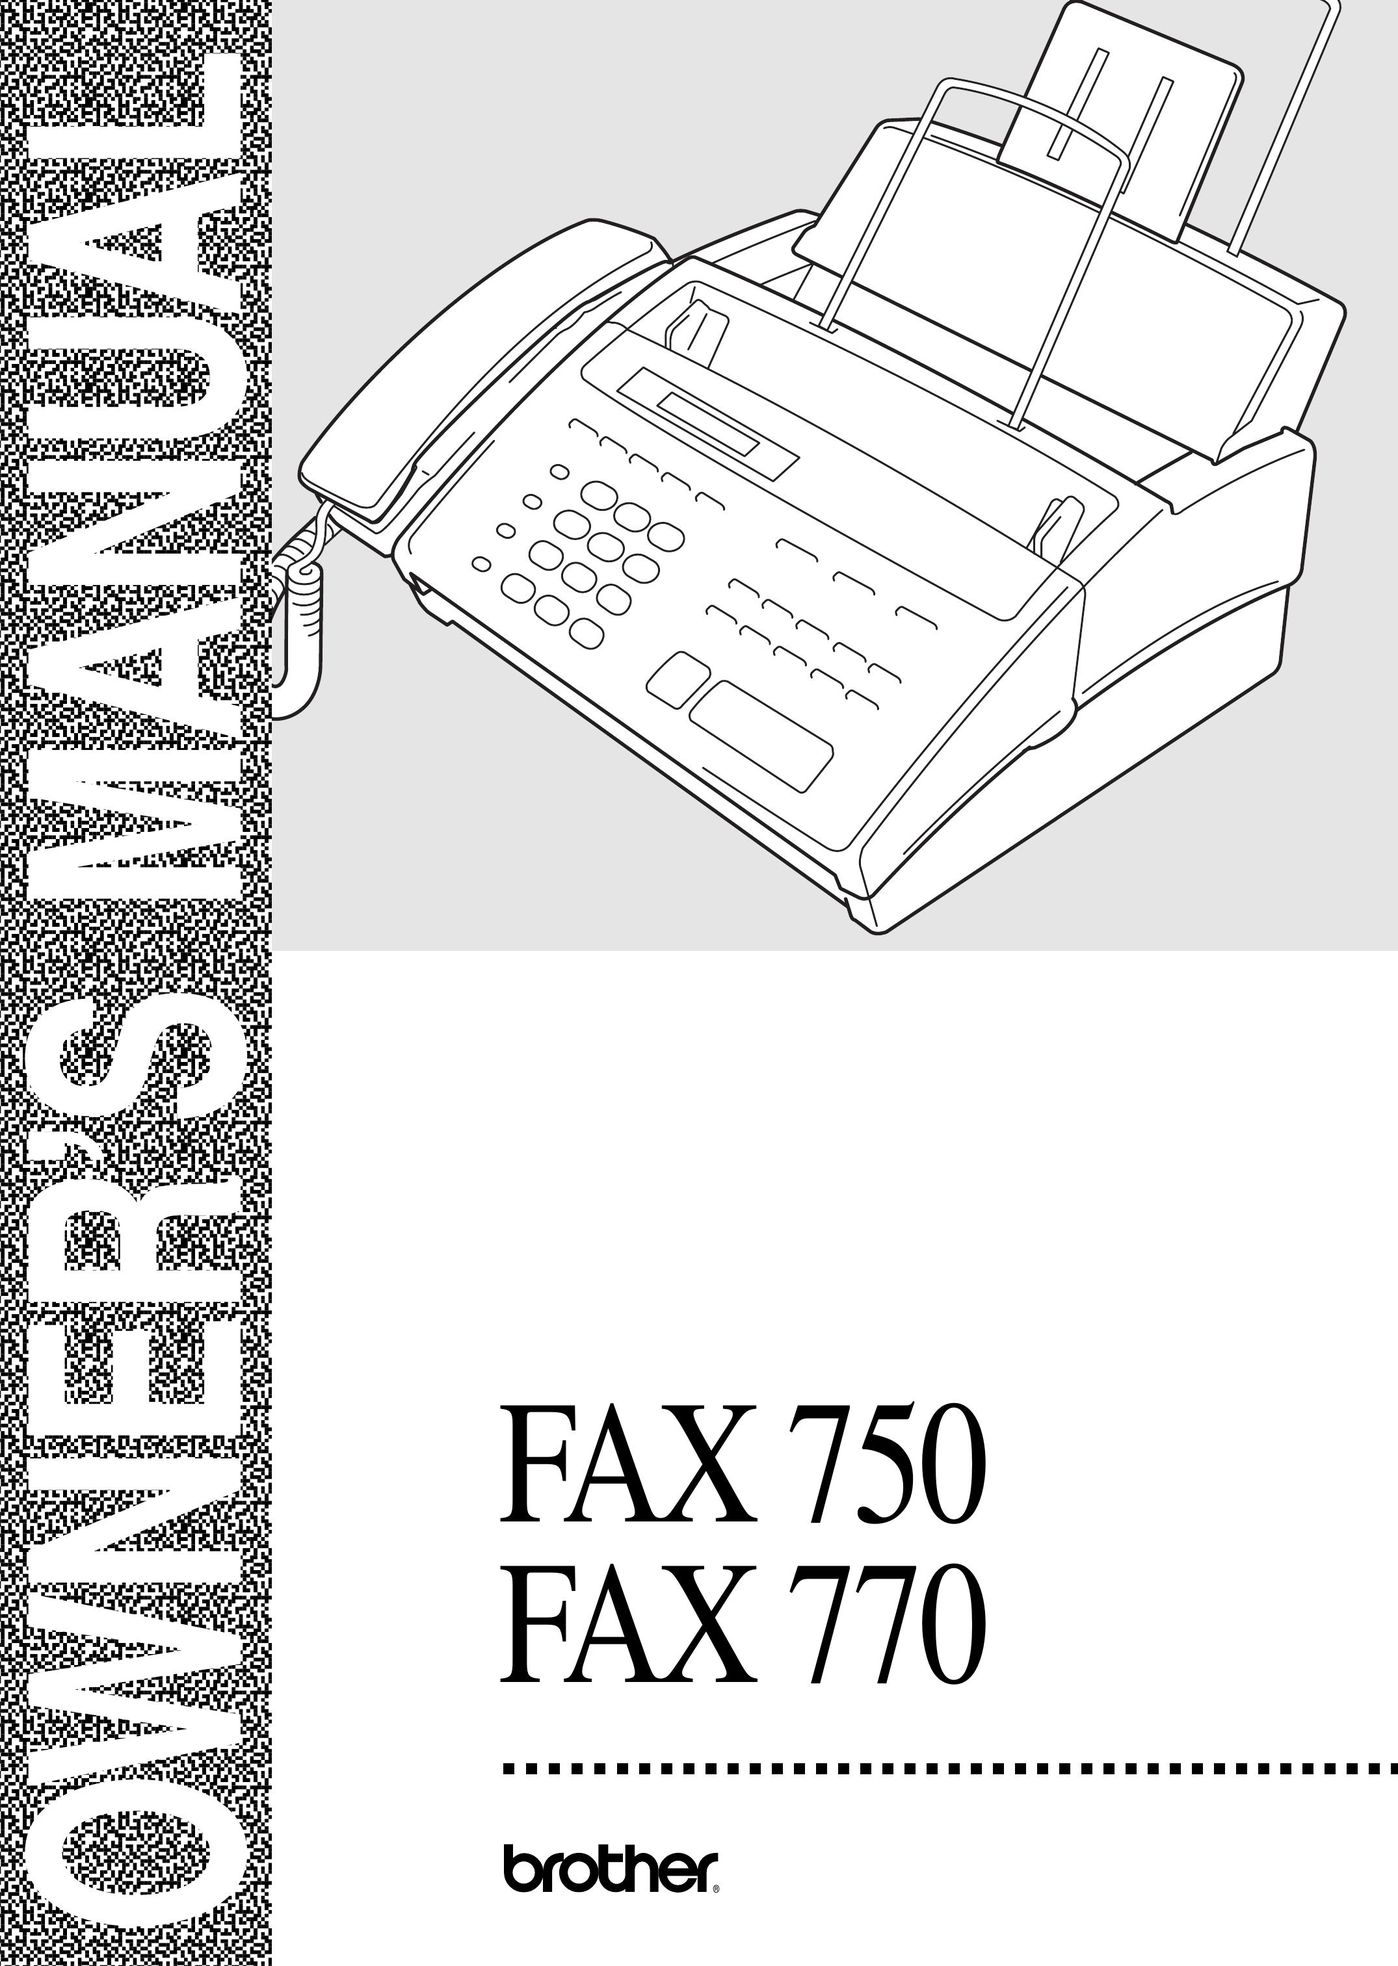 Brother 750 Fax Machine User Manual